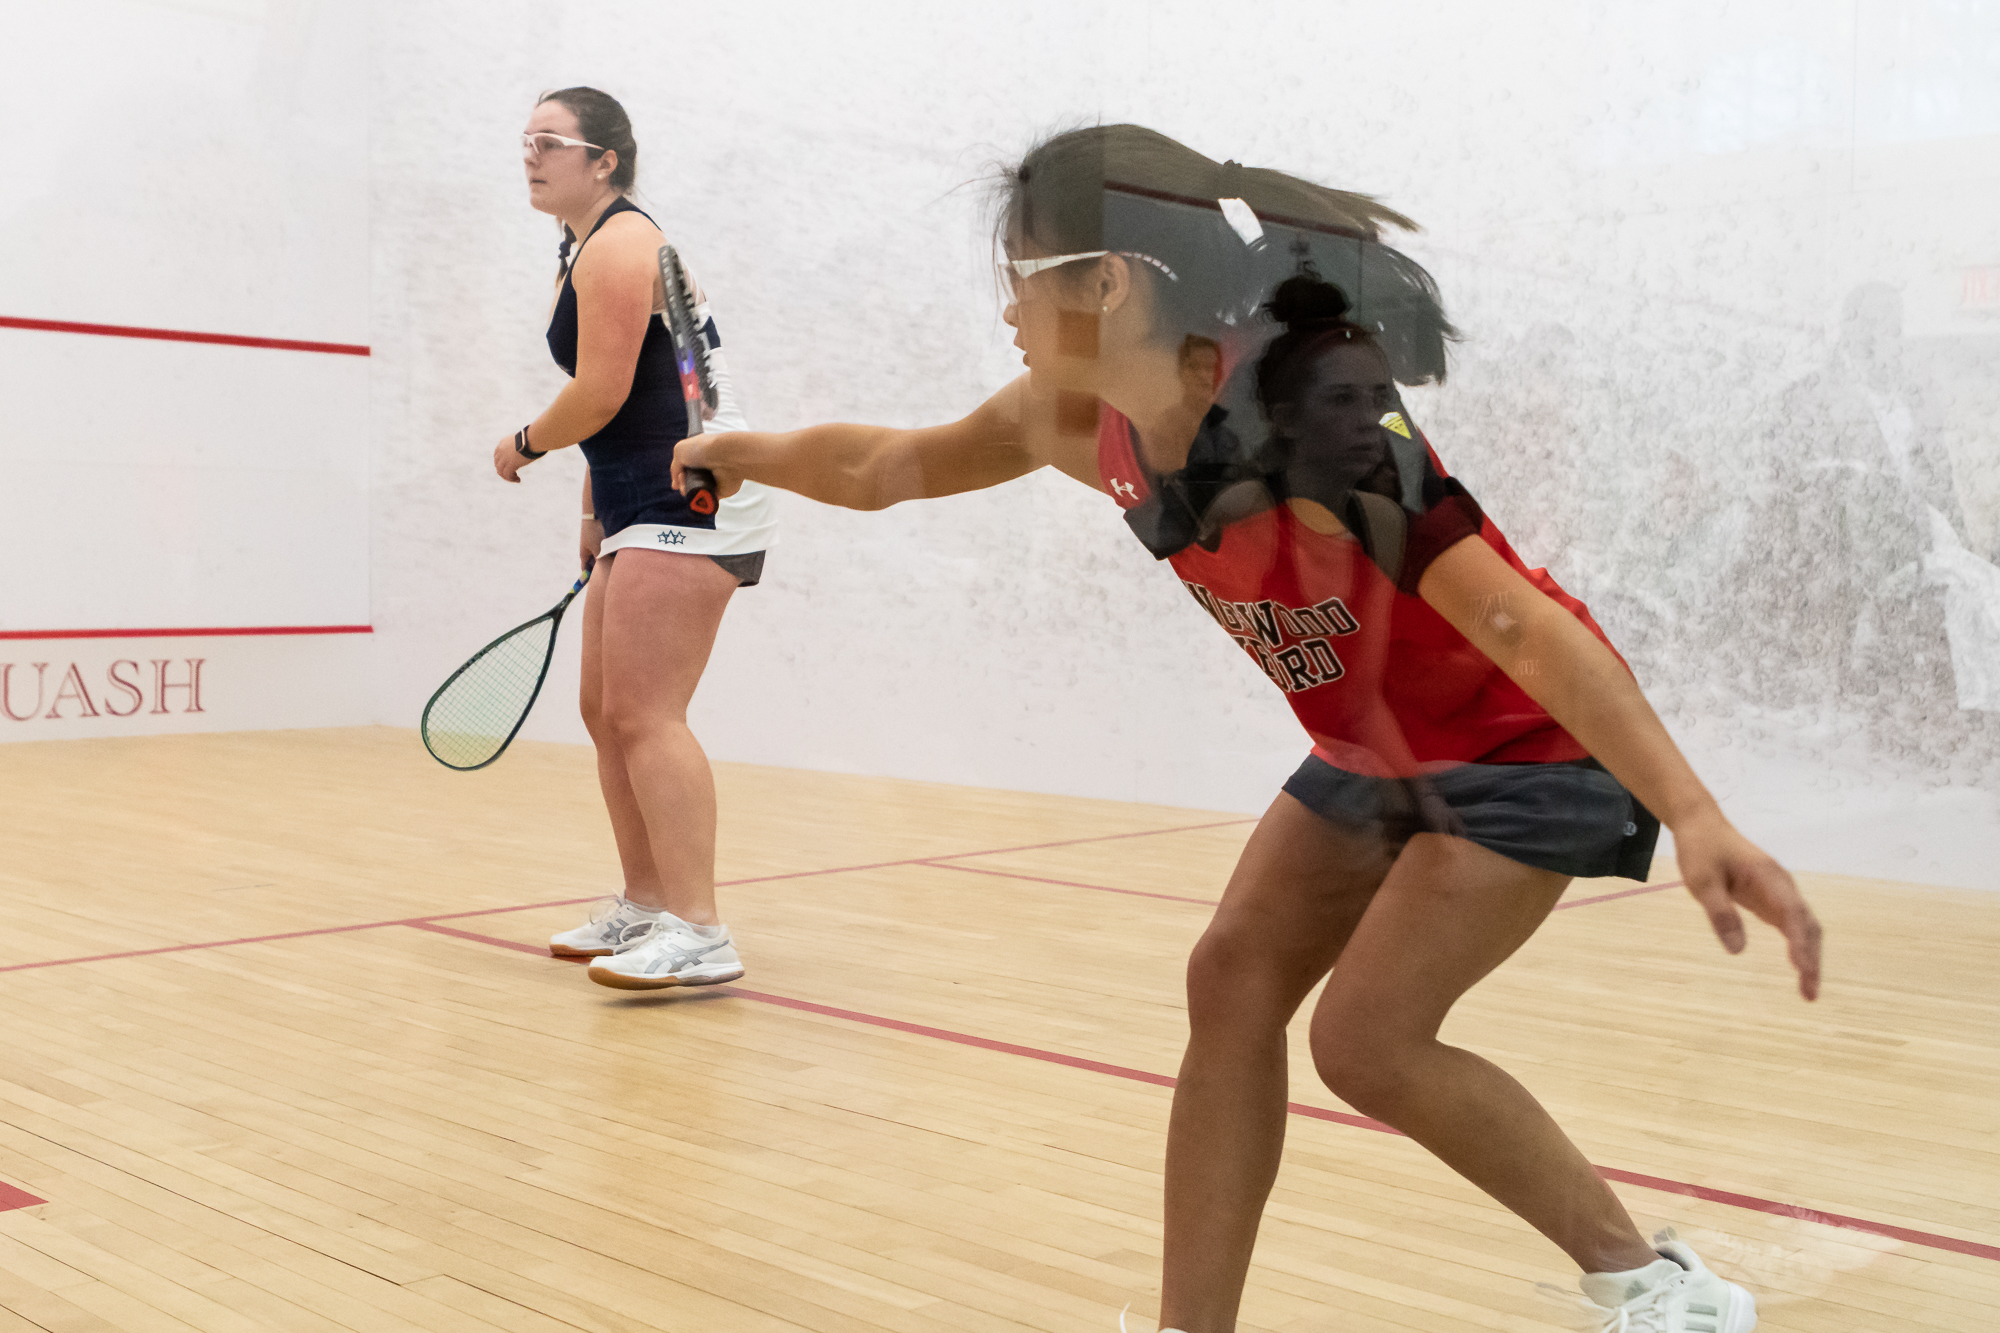 Girls play competitive sports and squash at Kingswood Oxford in West Hartford